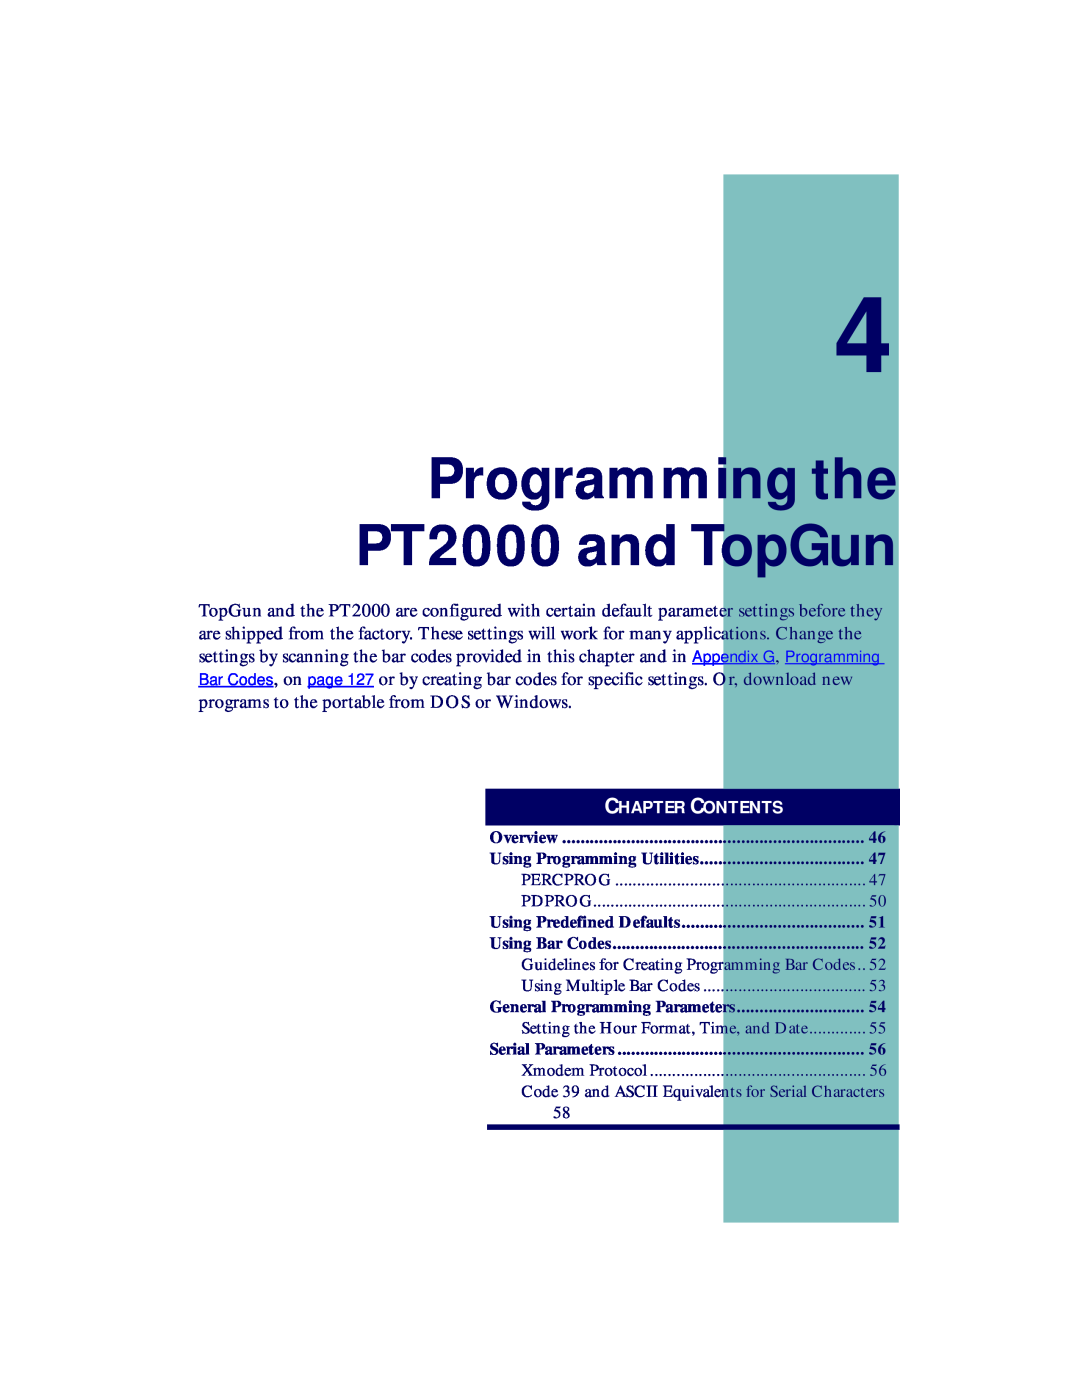 PSC manual Programming the PT2000 and TopGun, Chapter Contents 